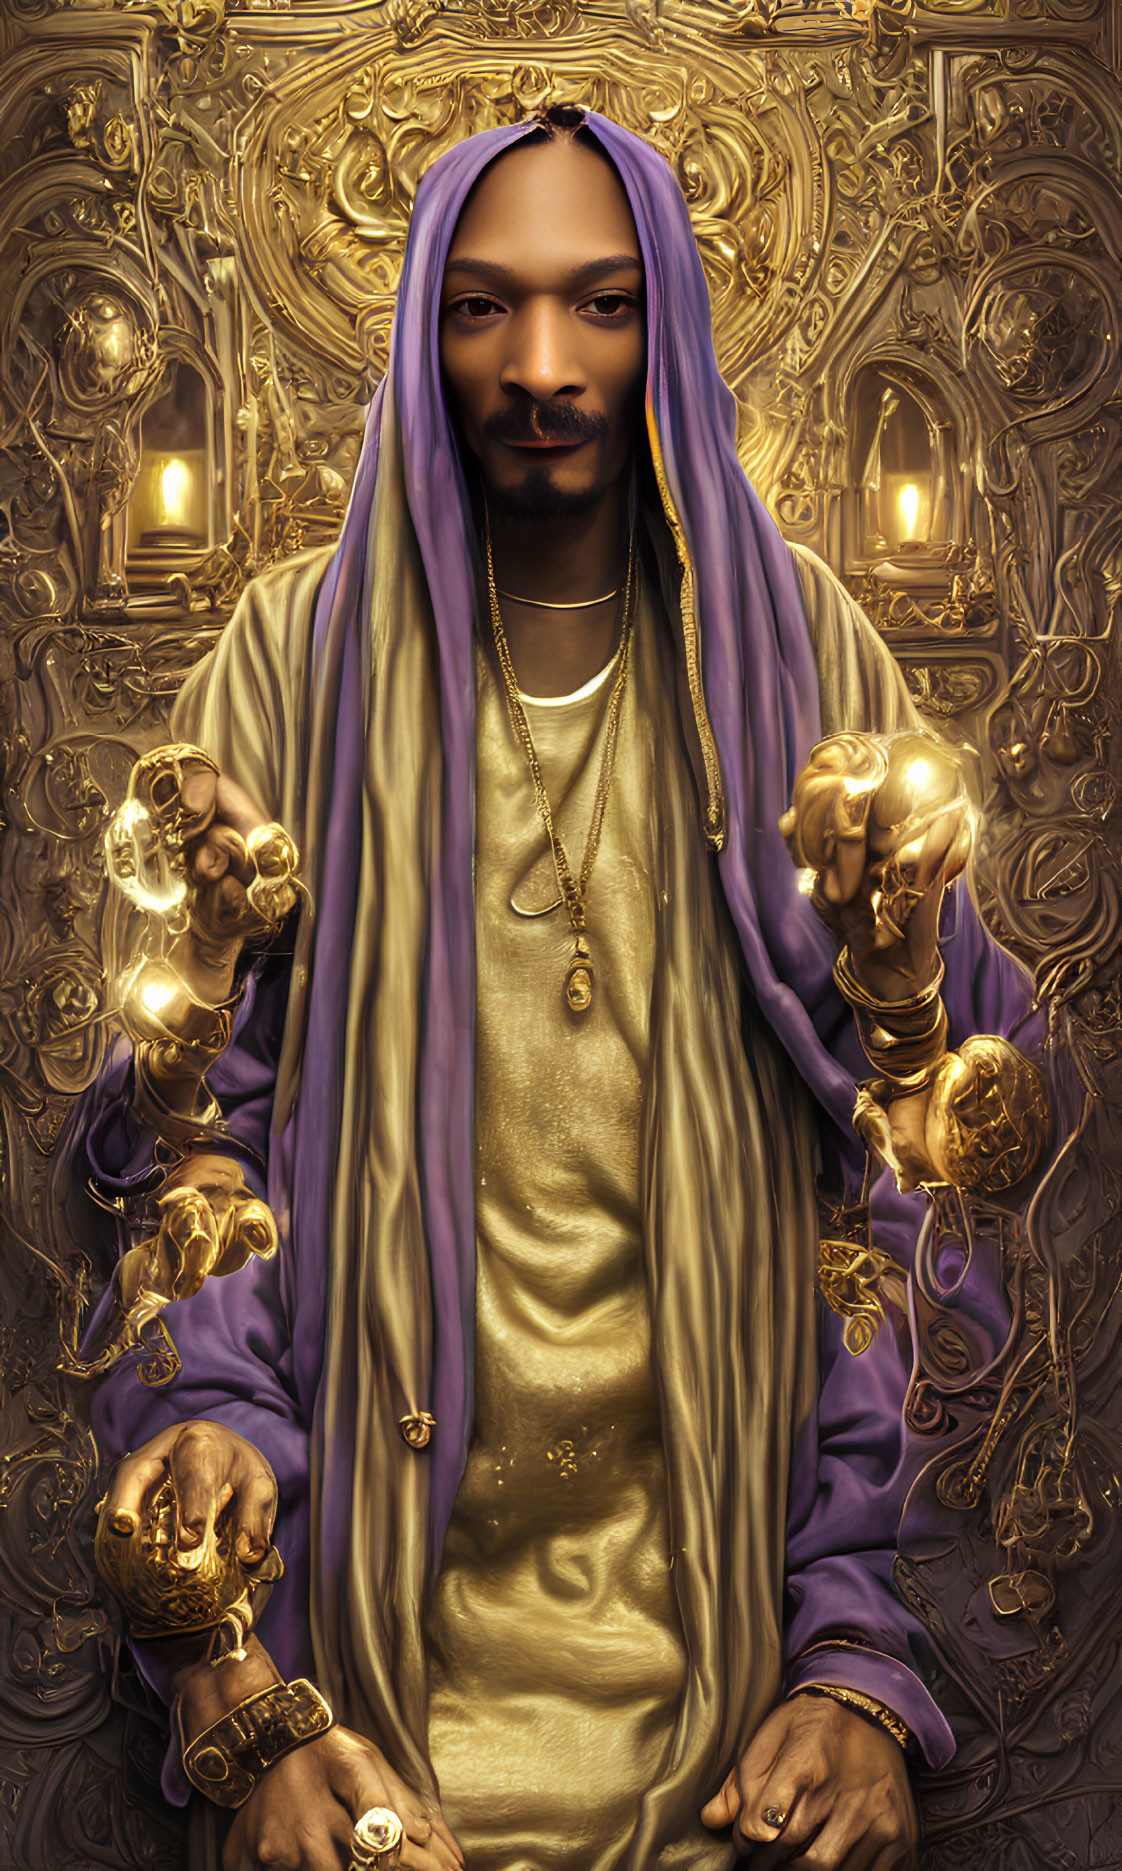 Illustration of man in purple headscarf with gold robes, surrounded by glowing skulls and intricate patterns